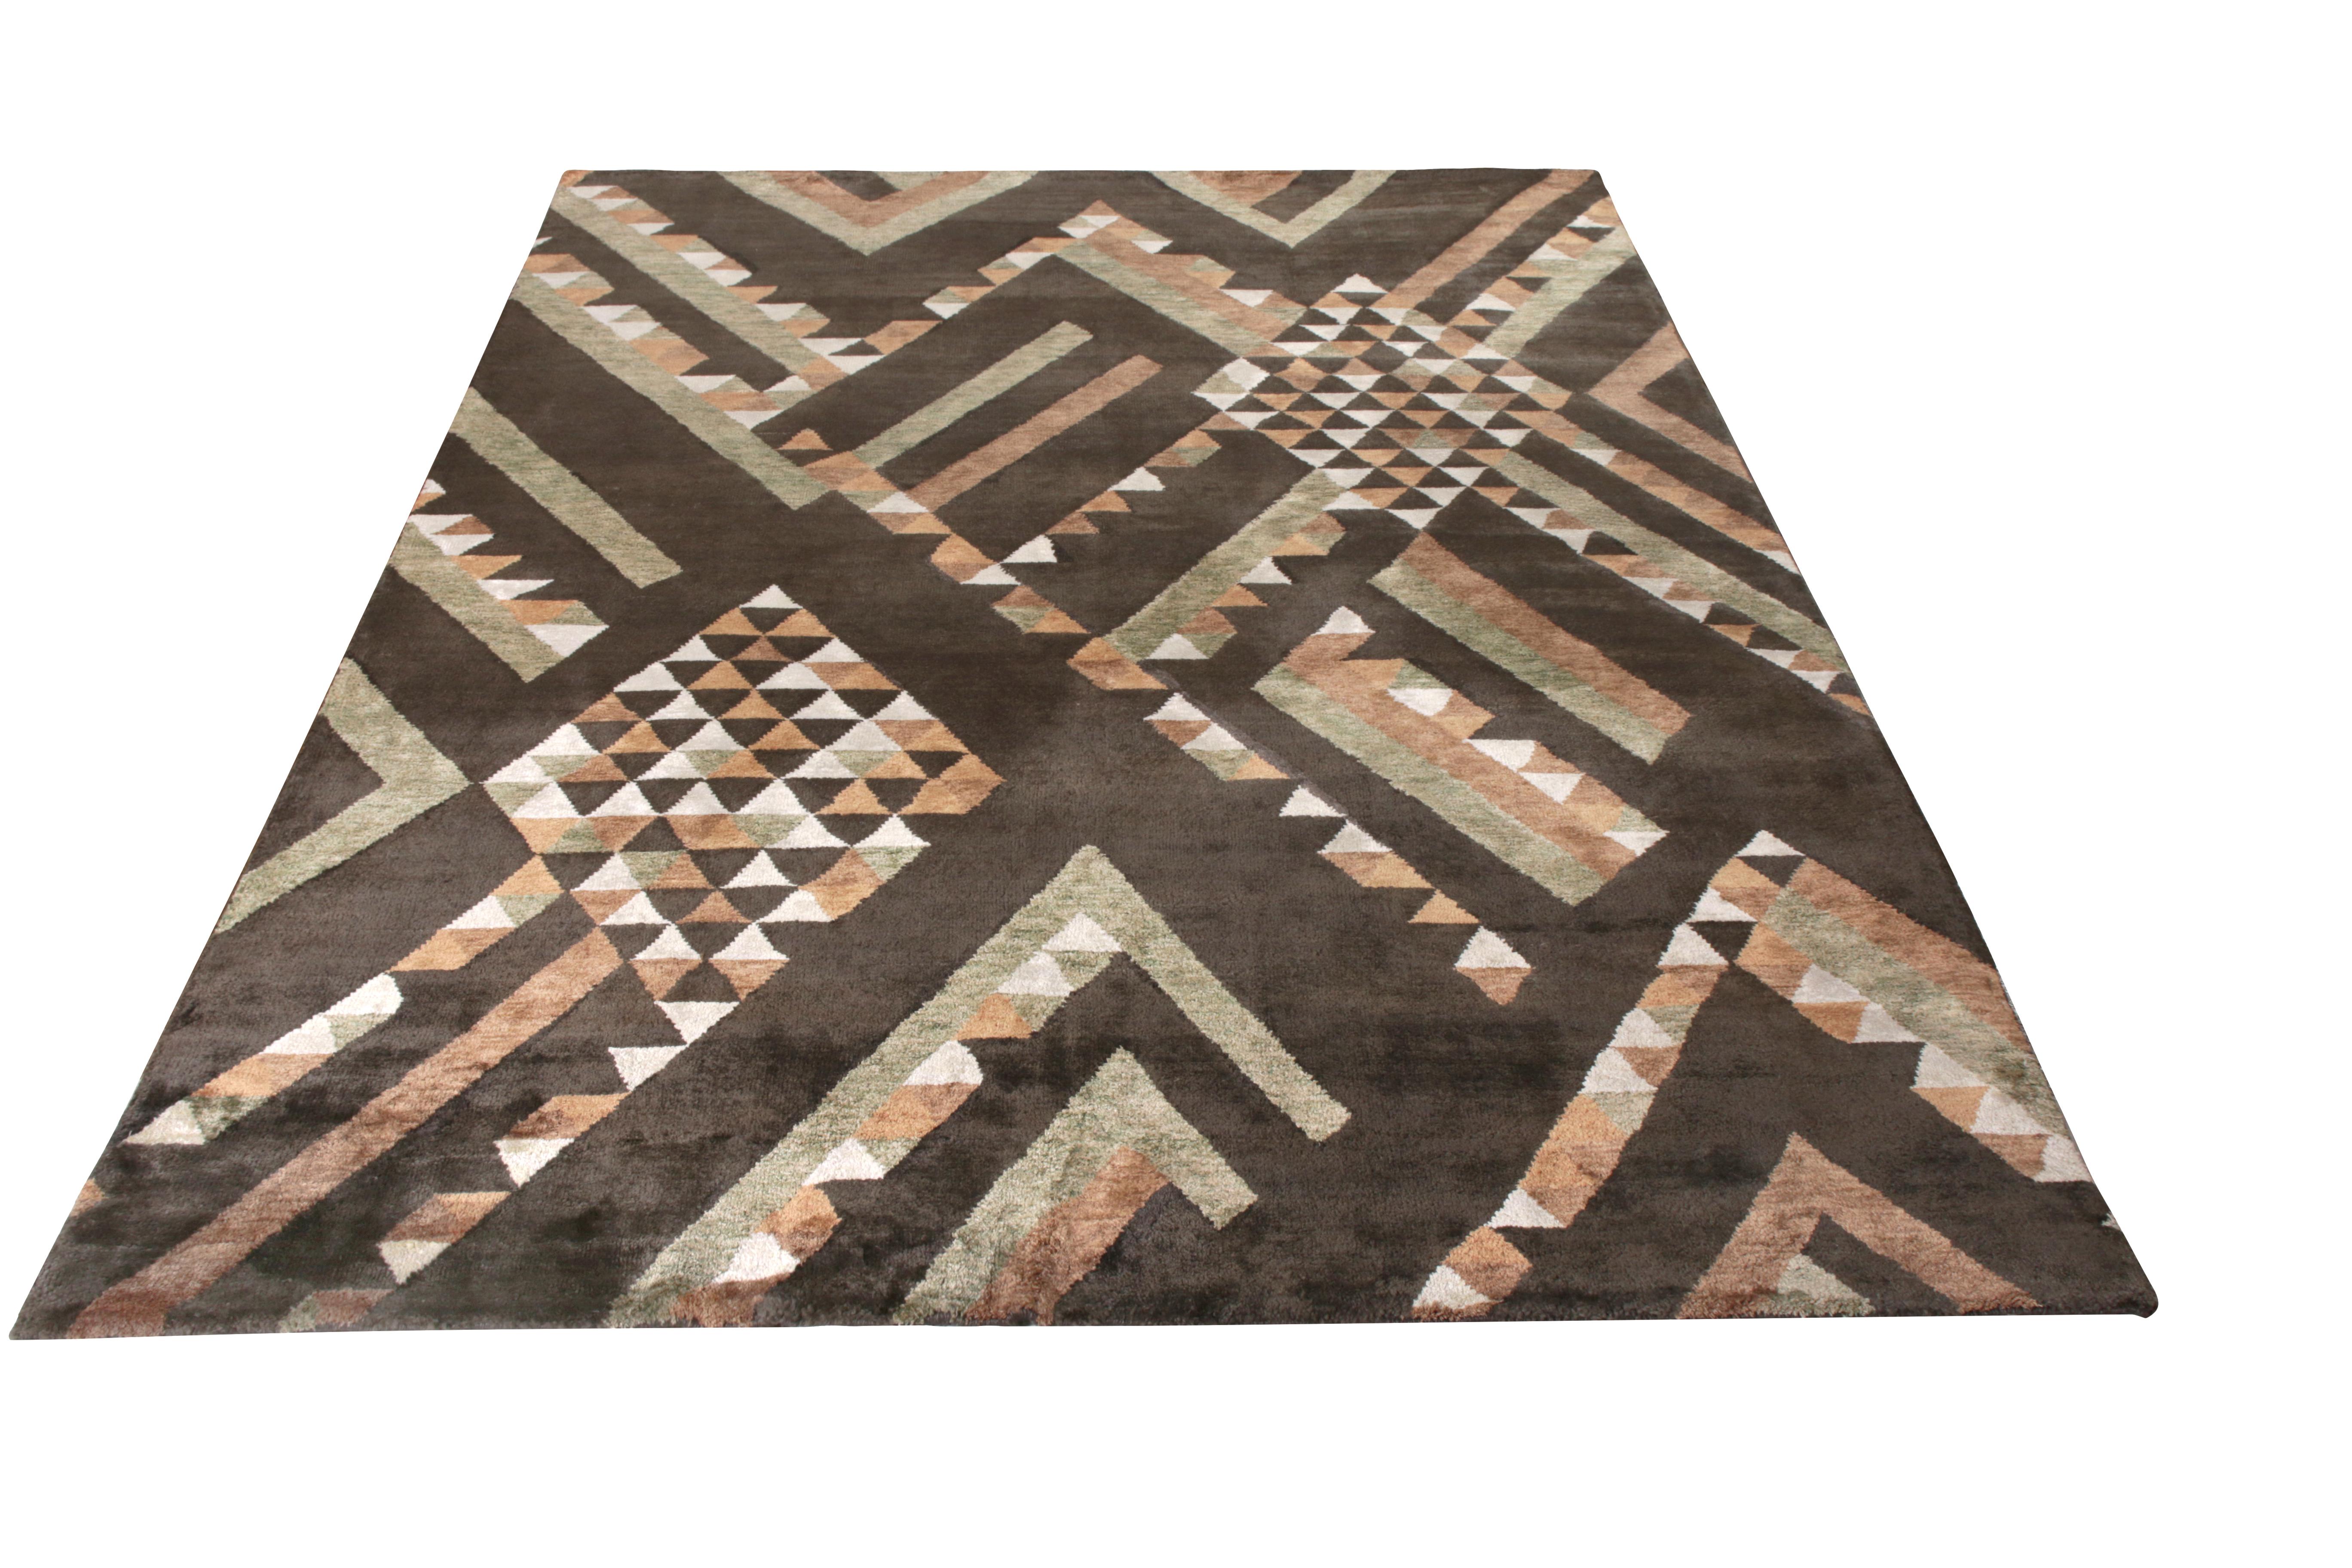 A unique 6 x 9 addition to the pile selections in Rug & Kilim’s award-winning Scandinavian collection, a celebration of Swedish modernism with new large scale geometry and exciting vintage colorways like that of their mid-century inspirations.